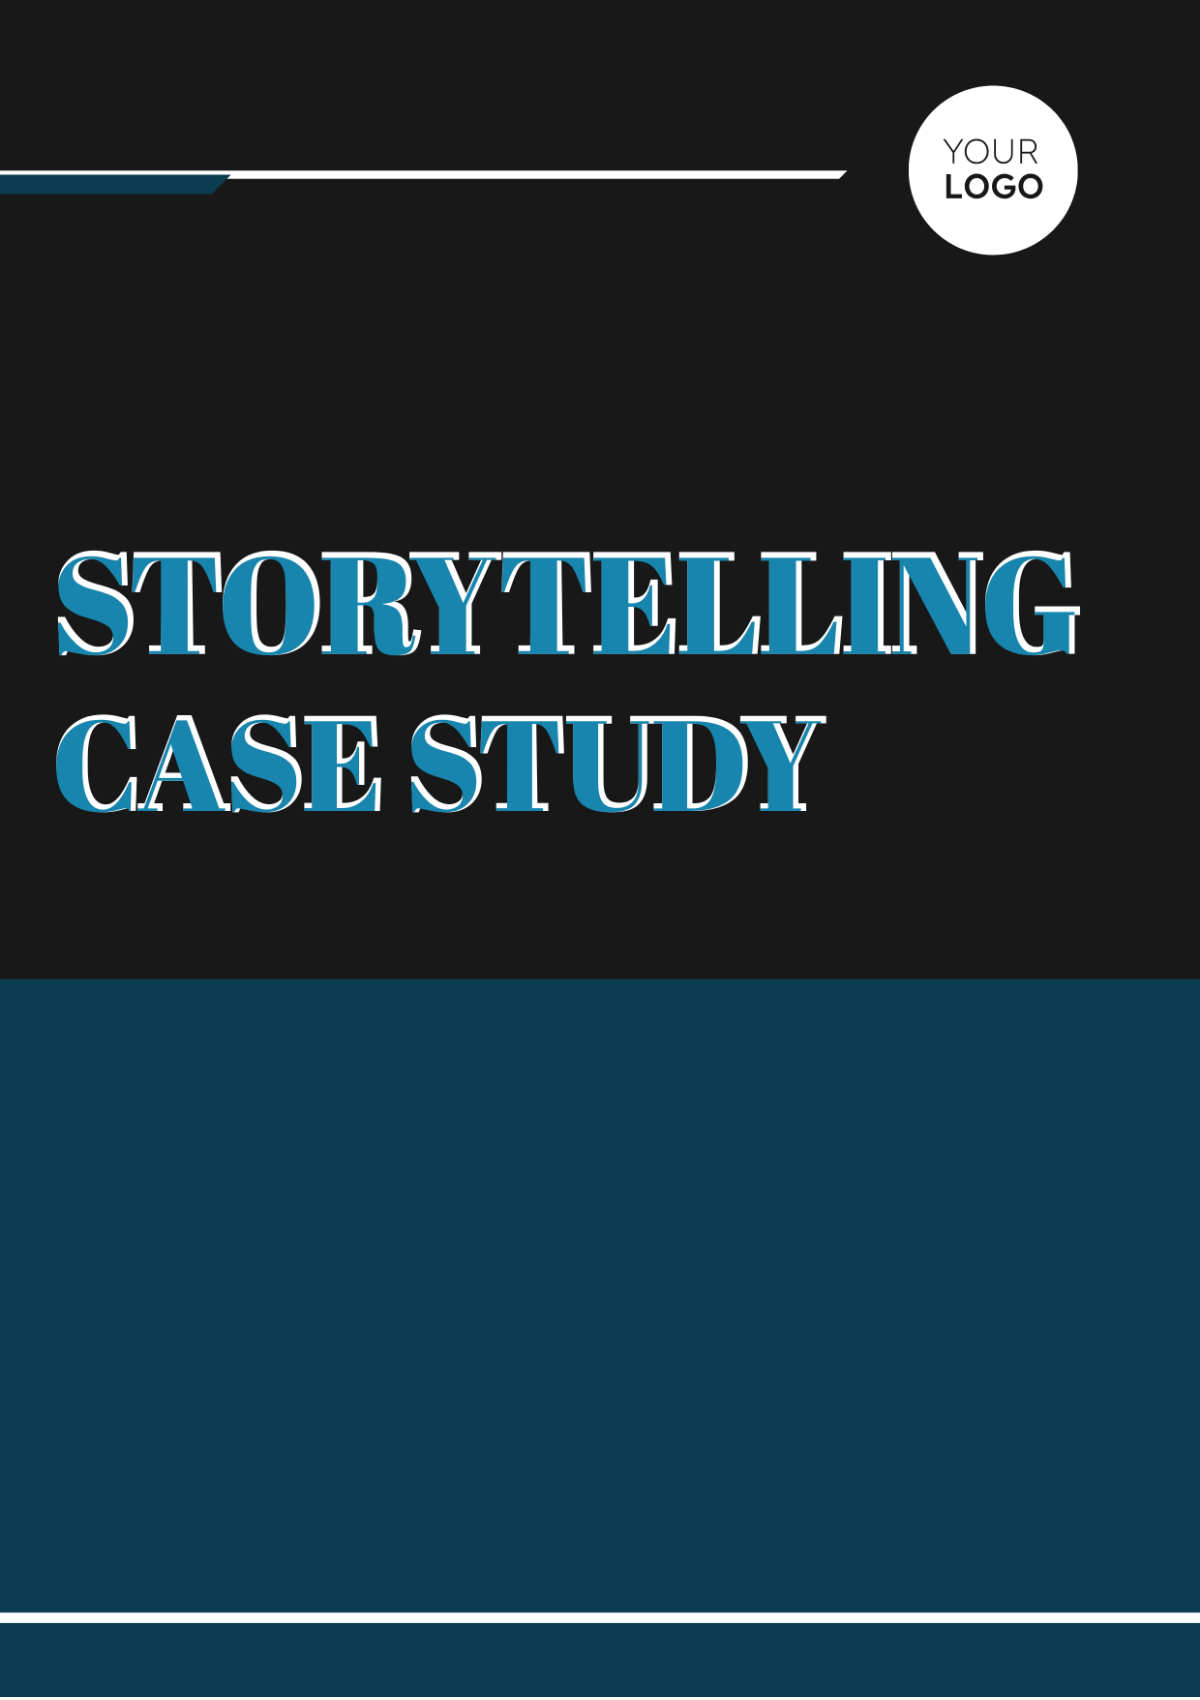 Free Storytelling Case Study Template